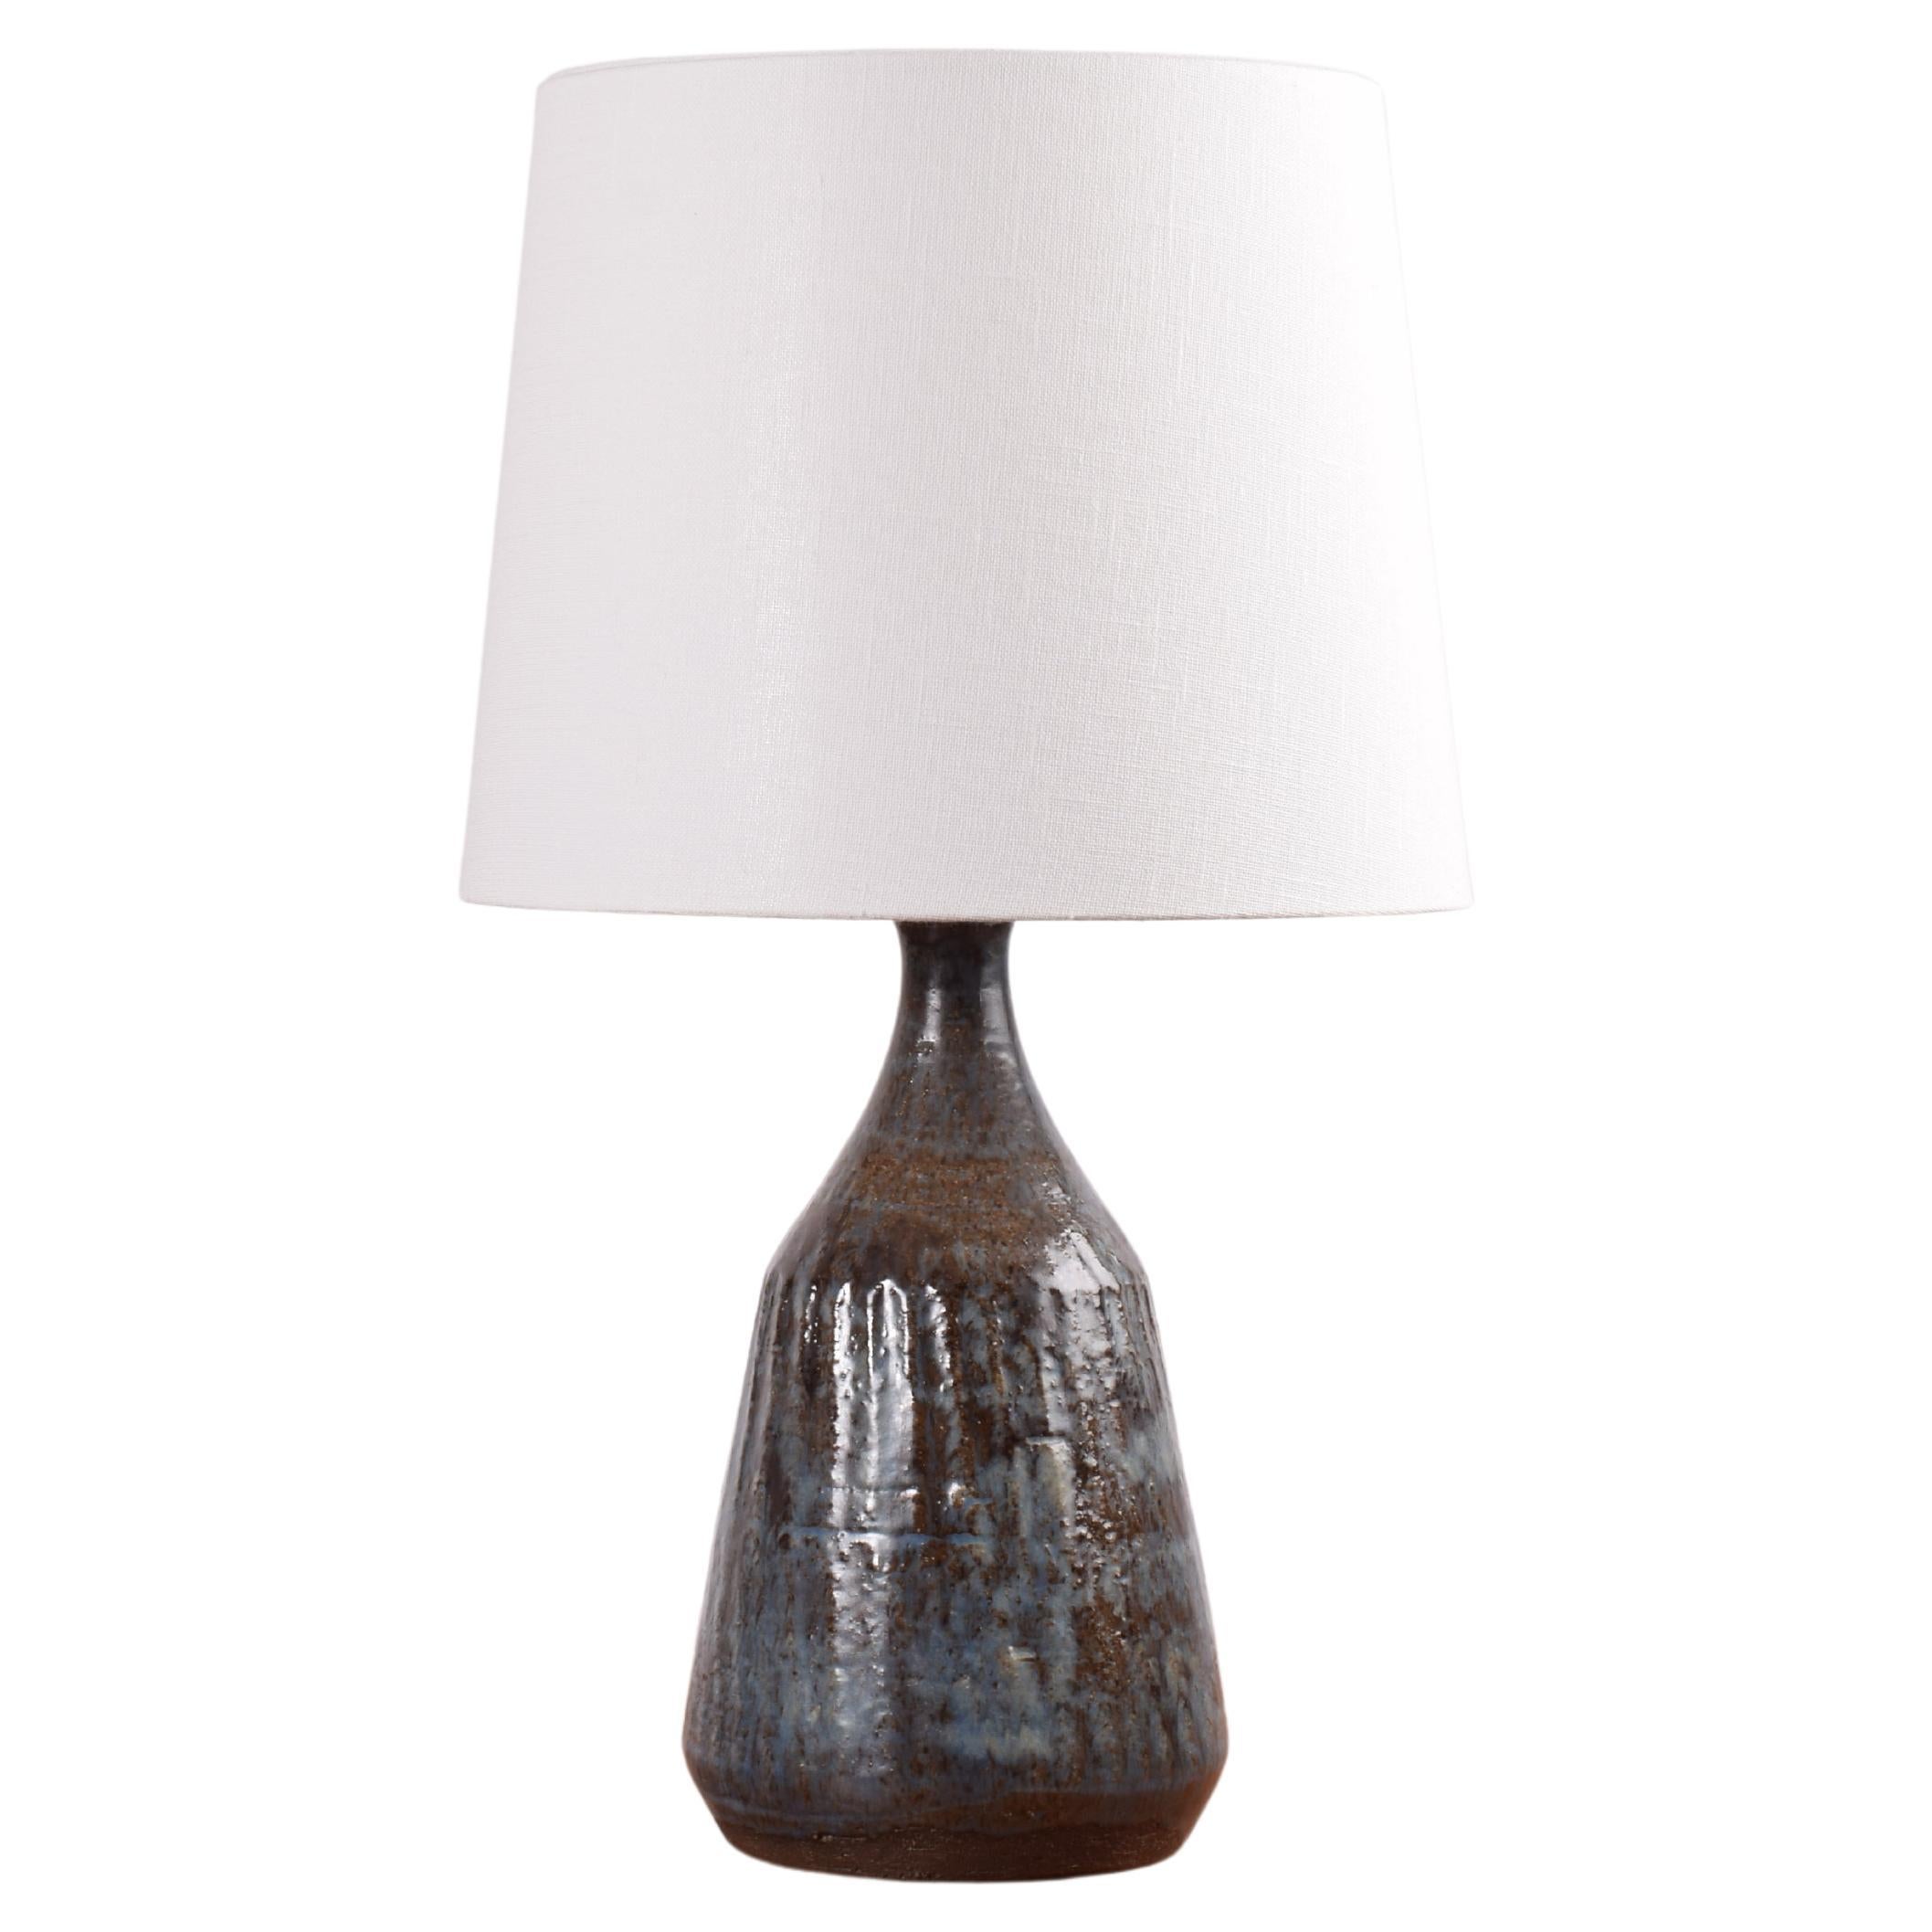 Danish Ceramic Table Lamp Blue and Brown Glaze with Shade, Modern, 1960s